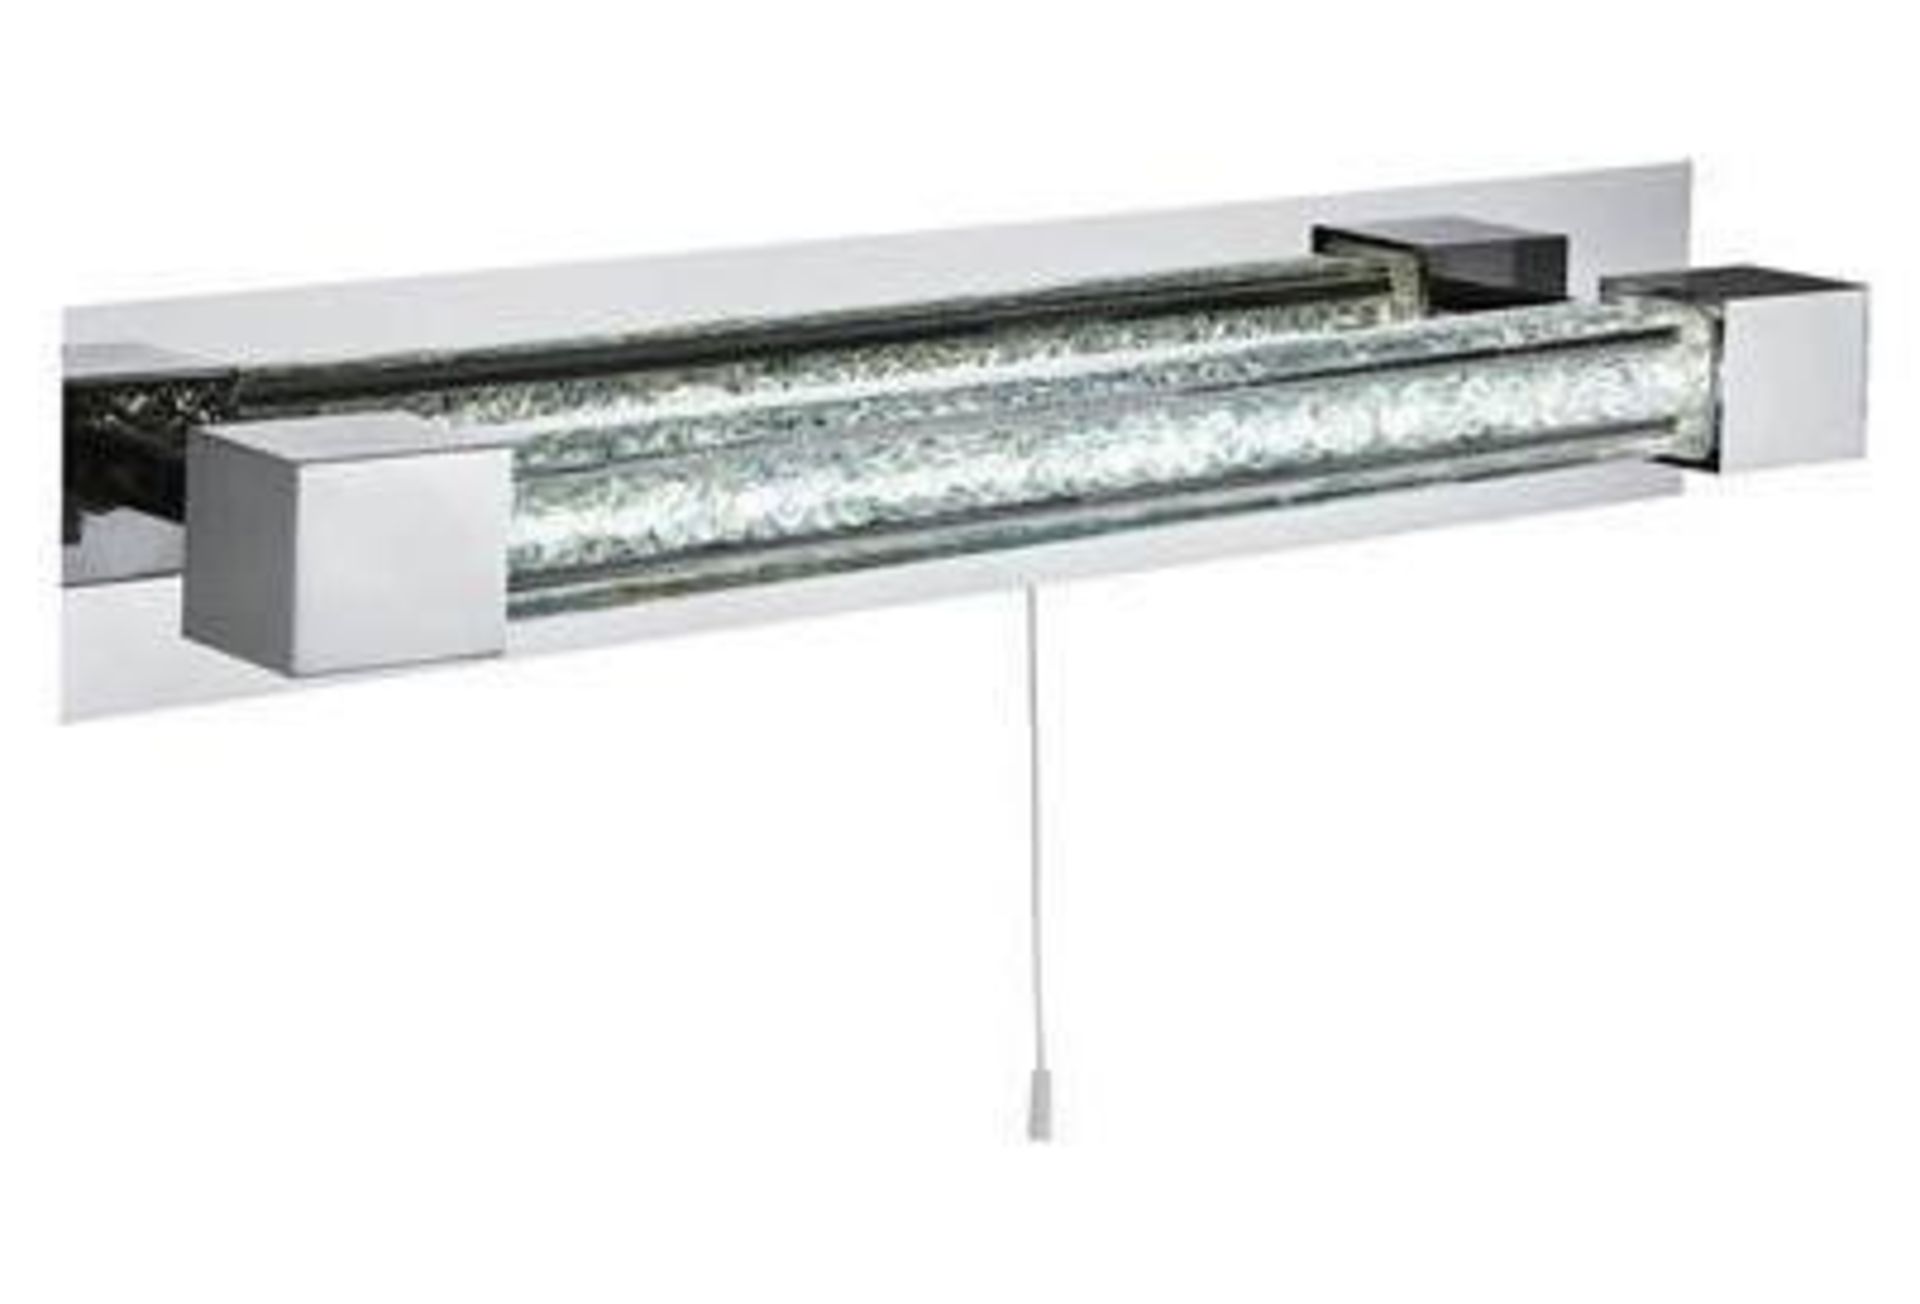 1 x Chrome LED Wall Light With Clear Crystal Glass Bar Diffuser - LED With Handy Pull Cord Switch - - Image 5 of 6